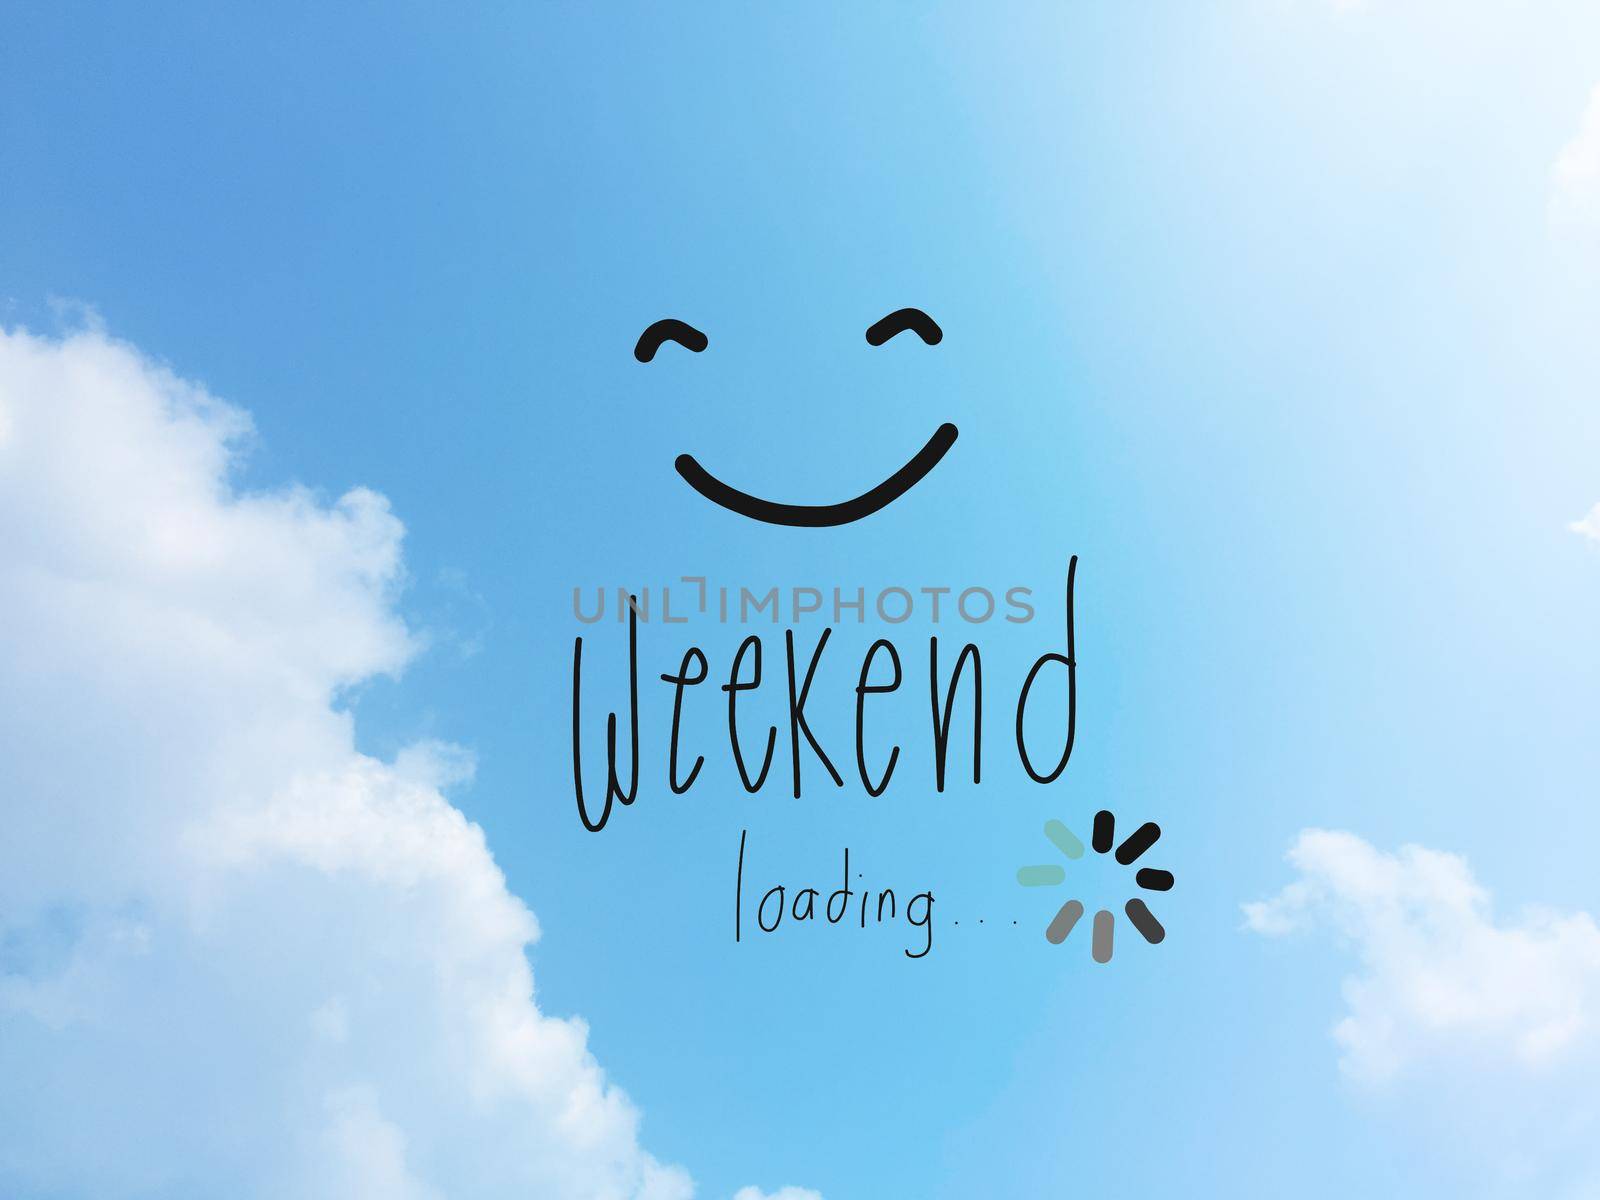 Weekend loading word and smile face on blue sky by Yoopho